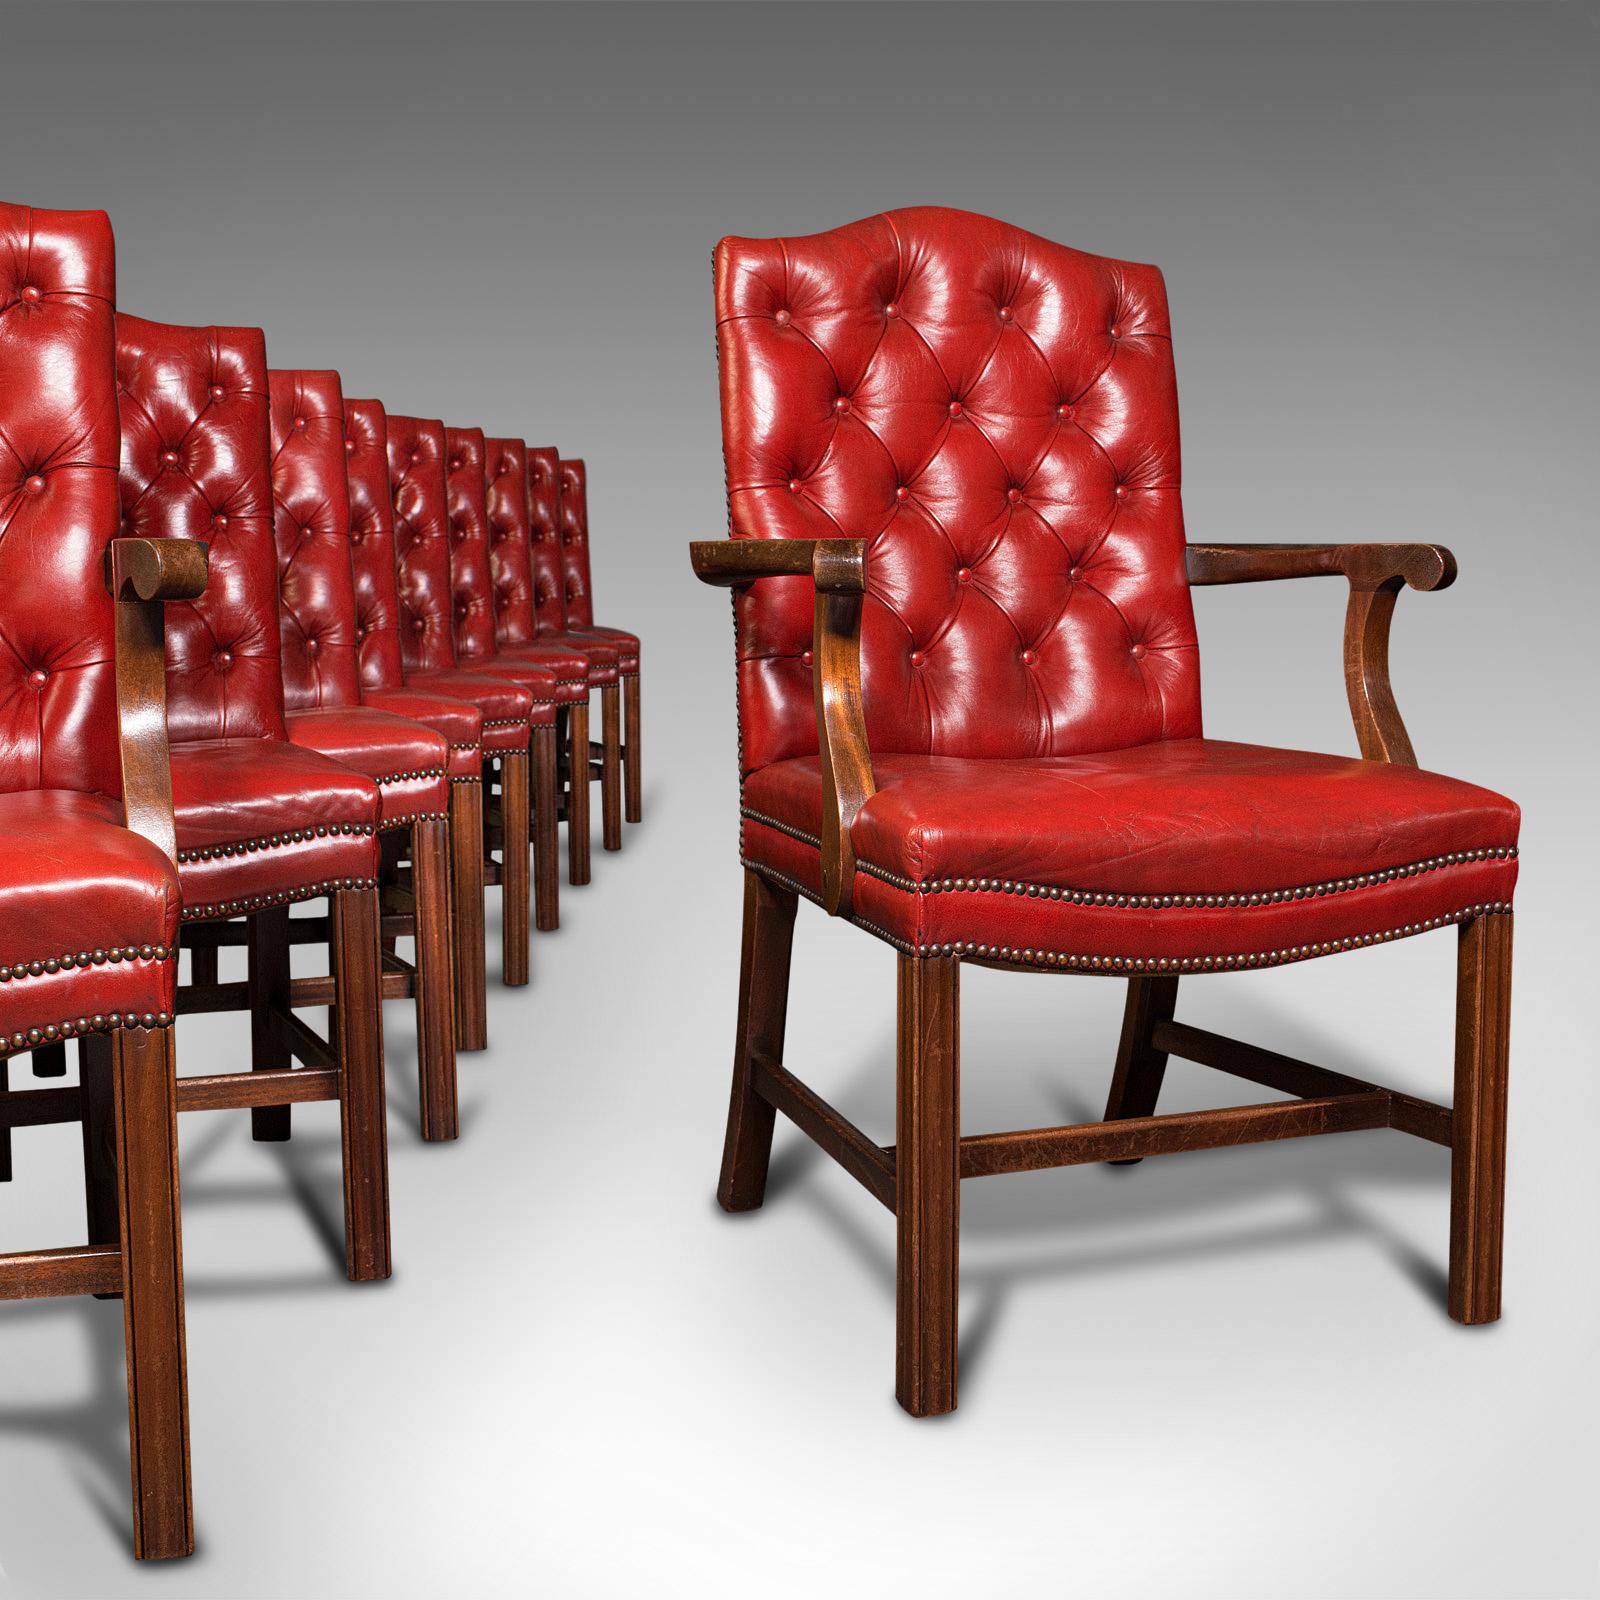 This is a set of 10 antique Gainsborough chairs. An English, leather dining suite with carver and slipper chairs, dating to the Edwardian period, circa 1910.

Beautifully presented chairs in the distinctive Gainsborough manner
Displaying a